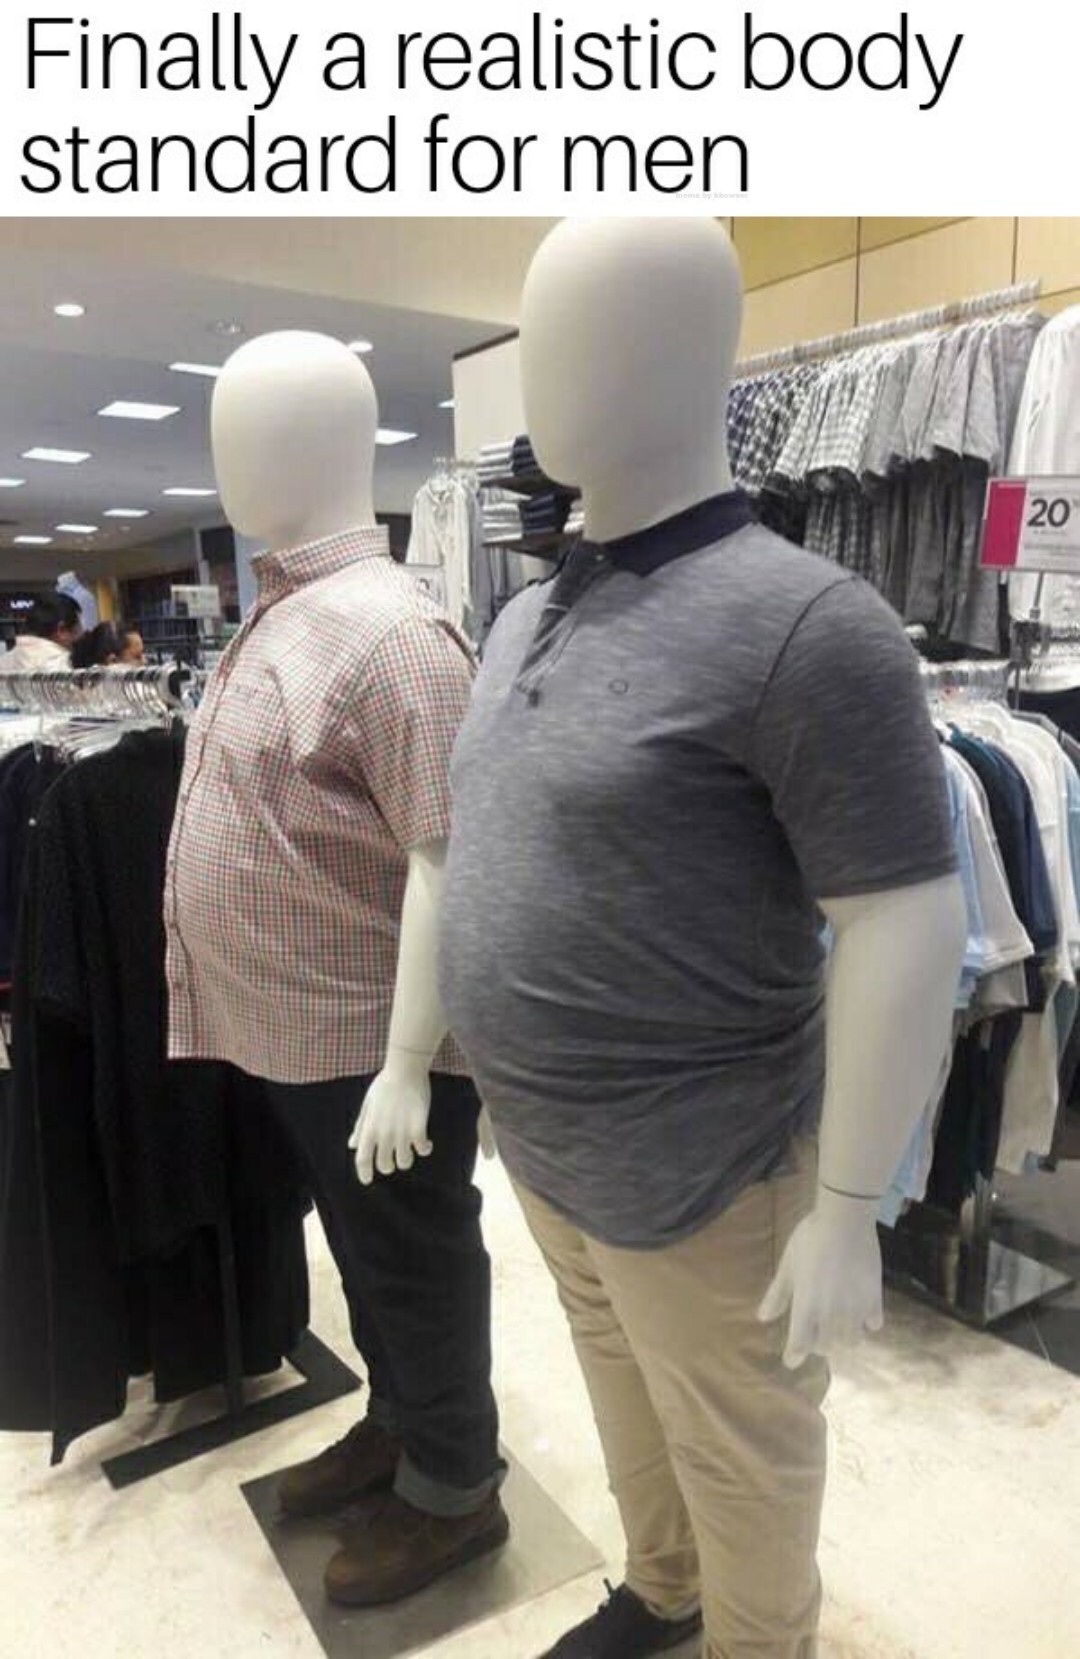 finally some realistic mannequins - Finally a realistic body standard for men 20